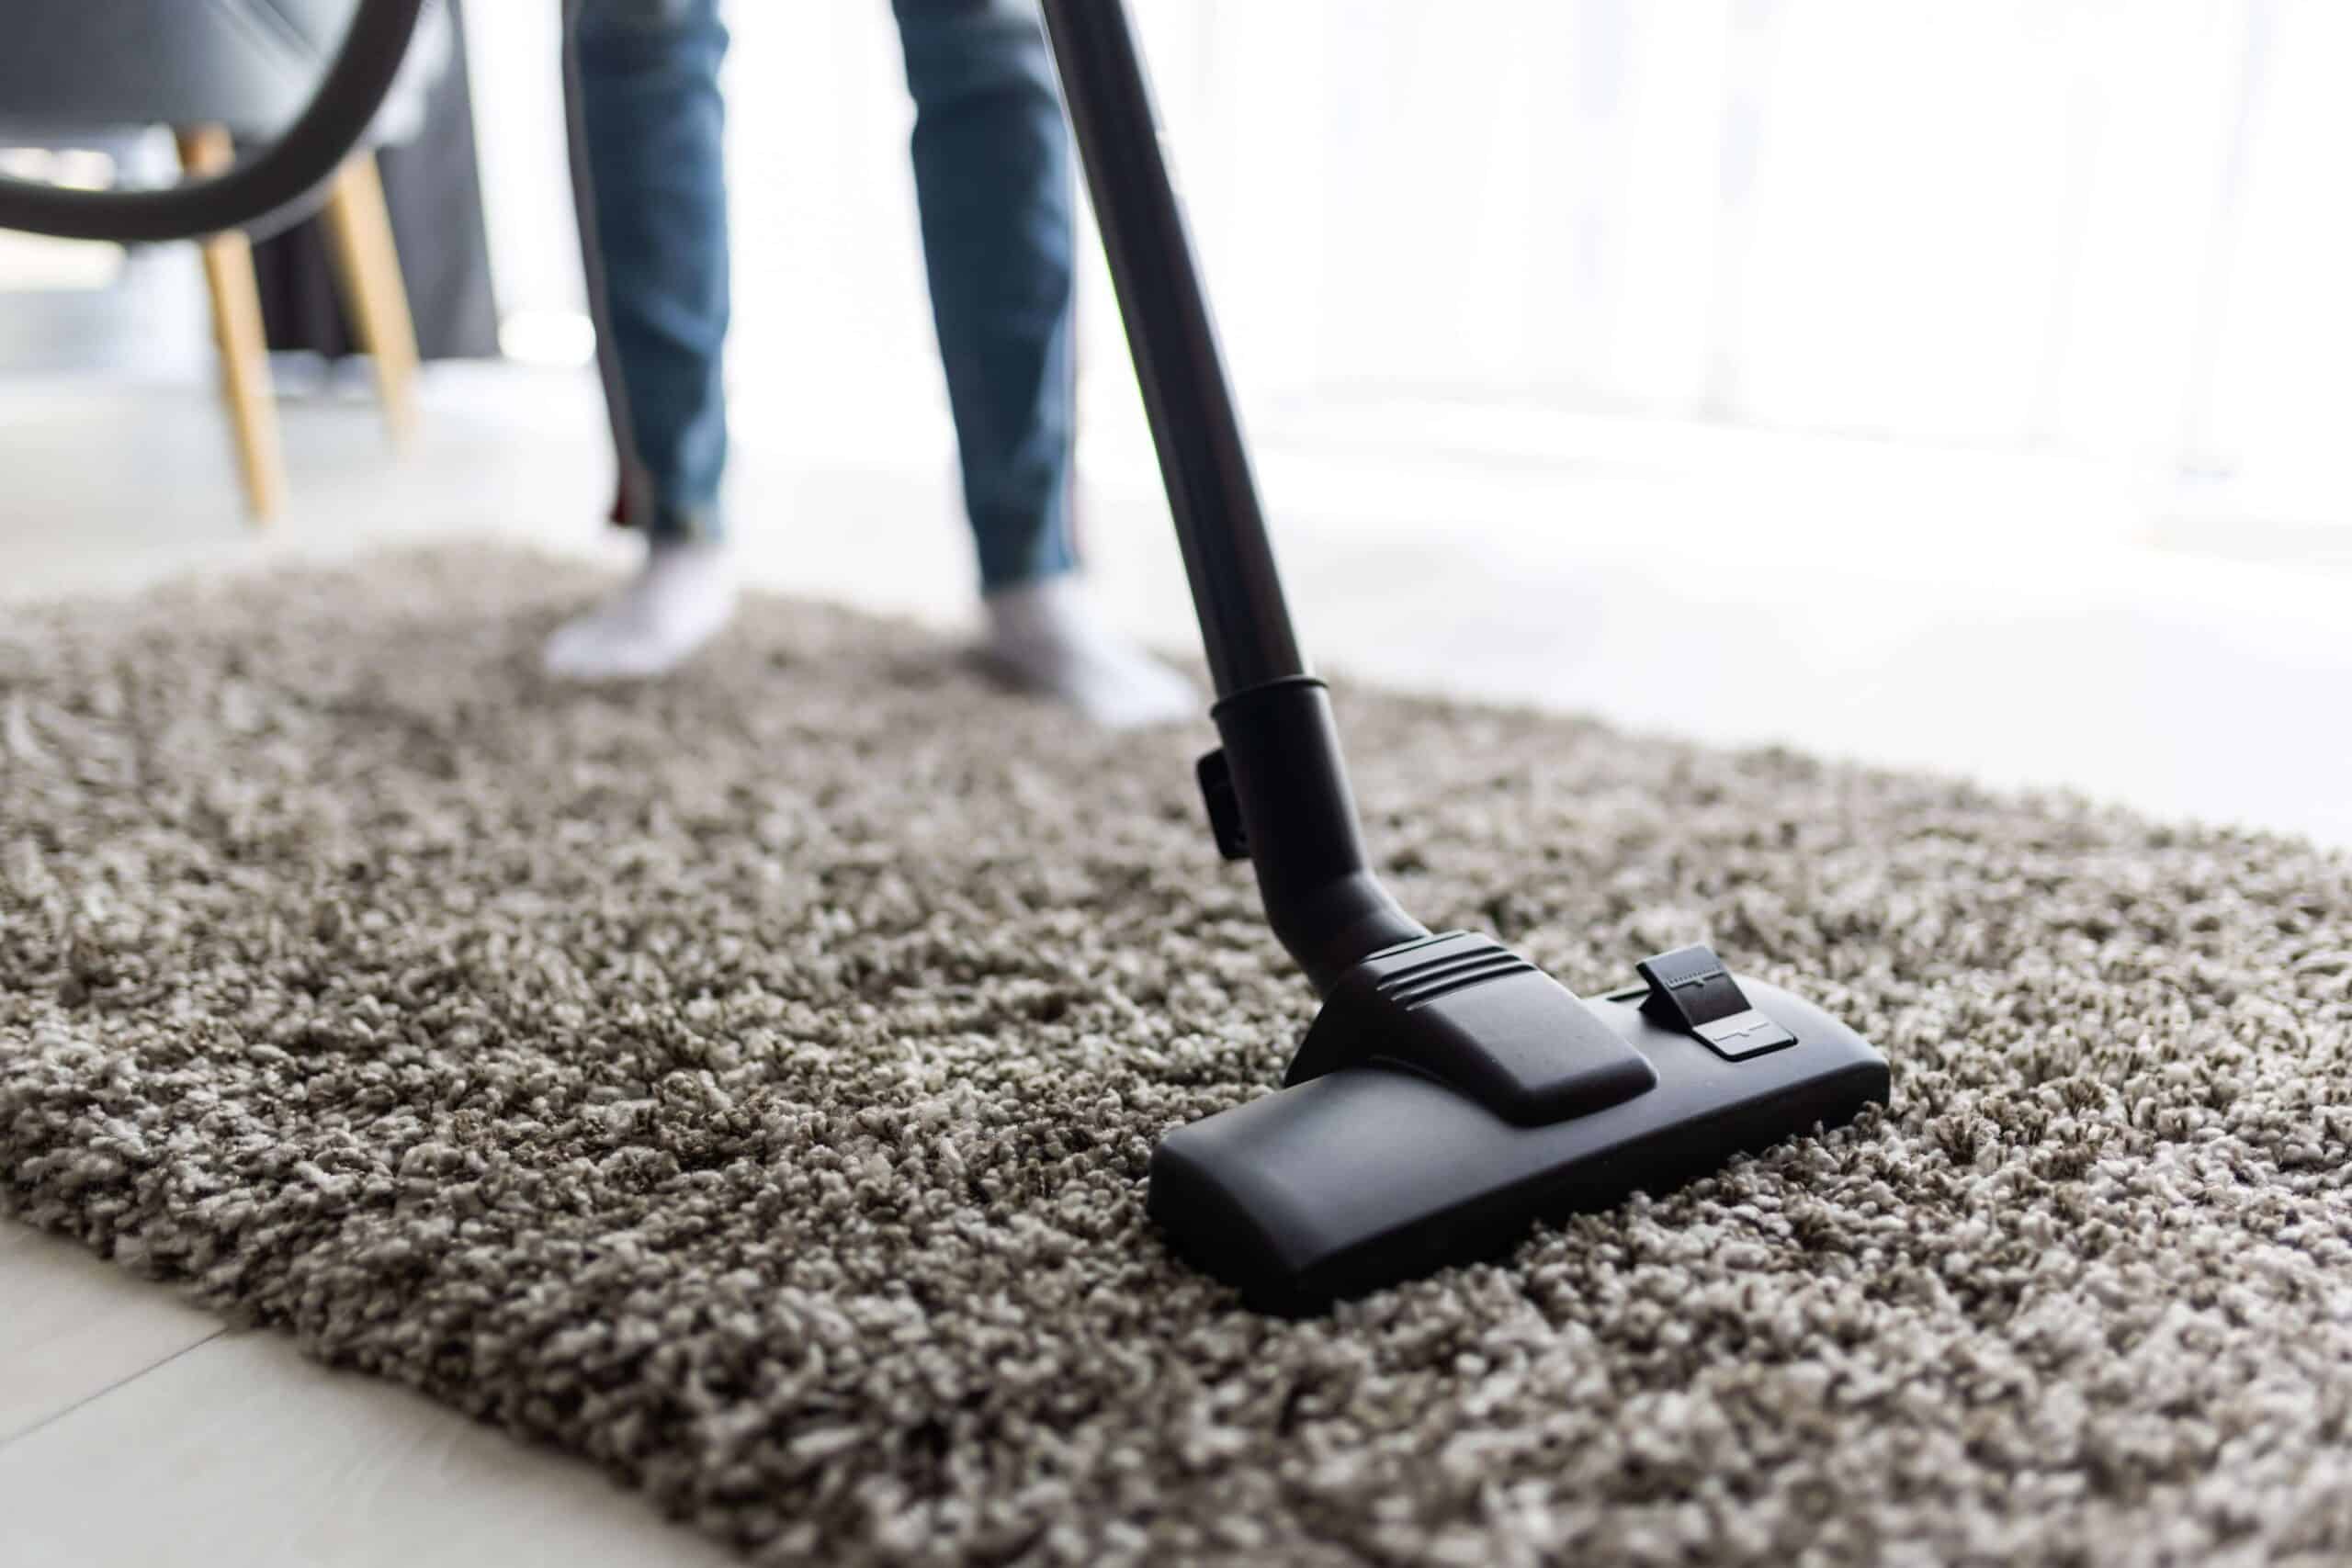 carpet steam cleaning services